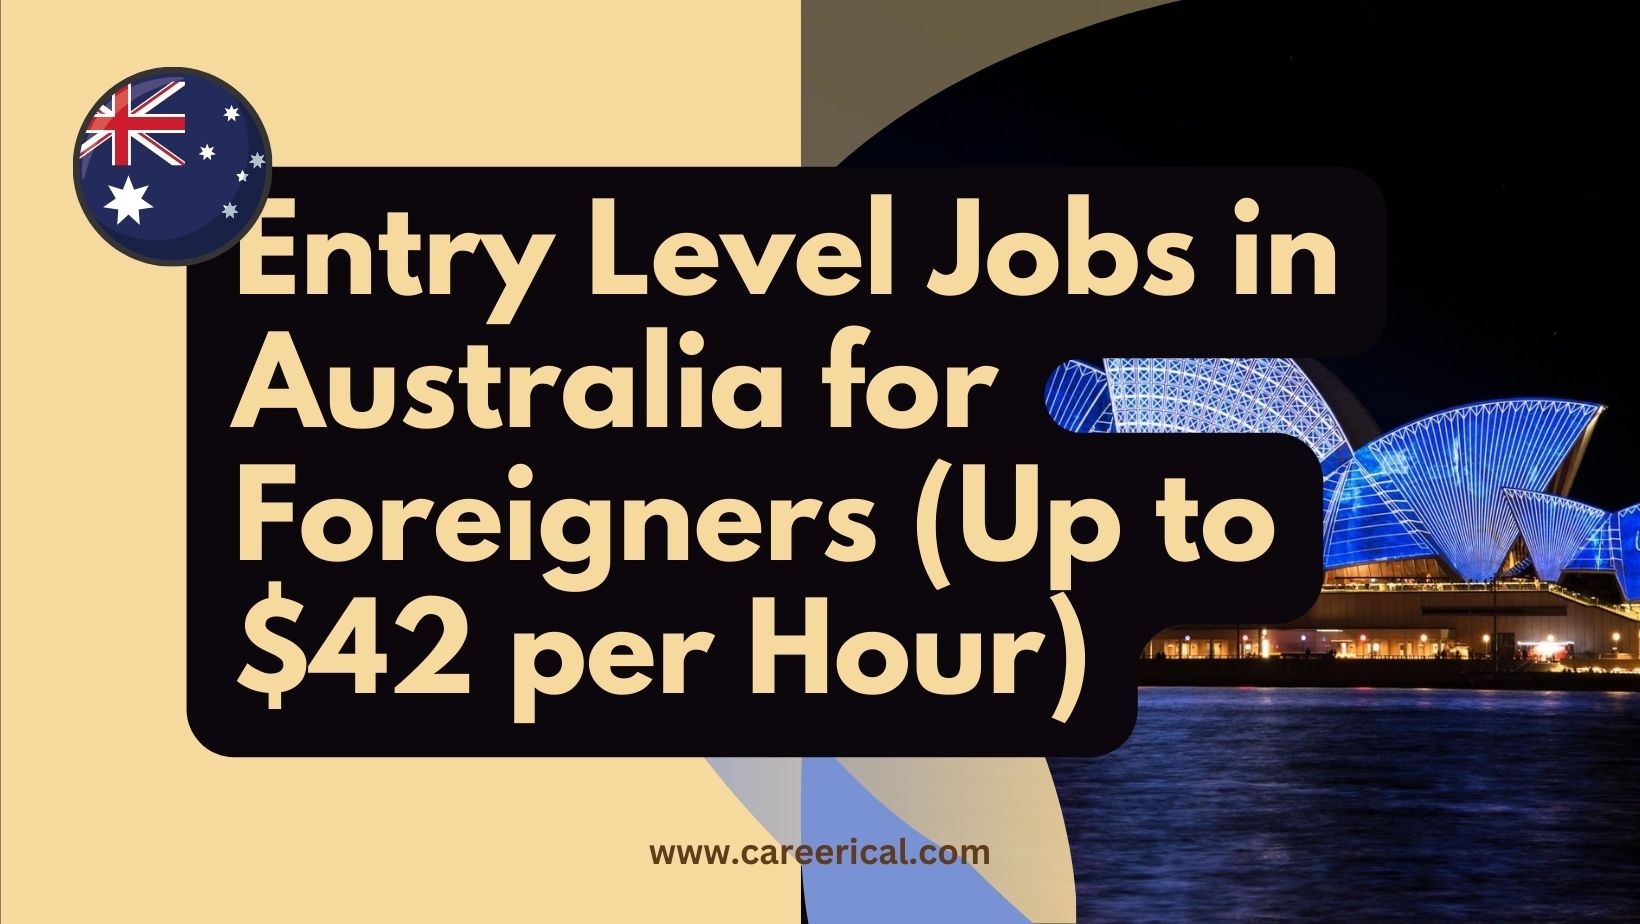 Entry Level Jobs in Australia for Foreigners (Up to $42 per Hour)